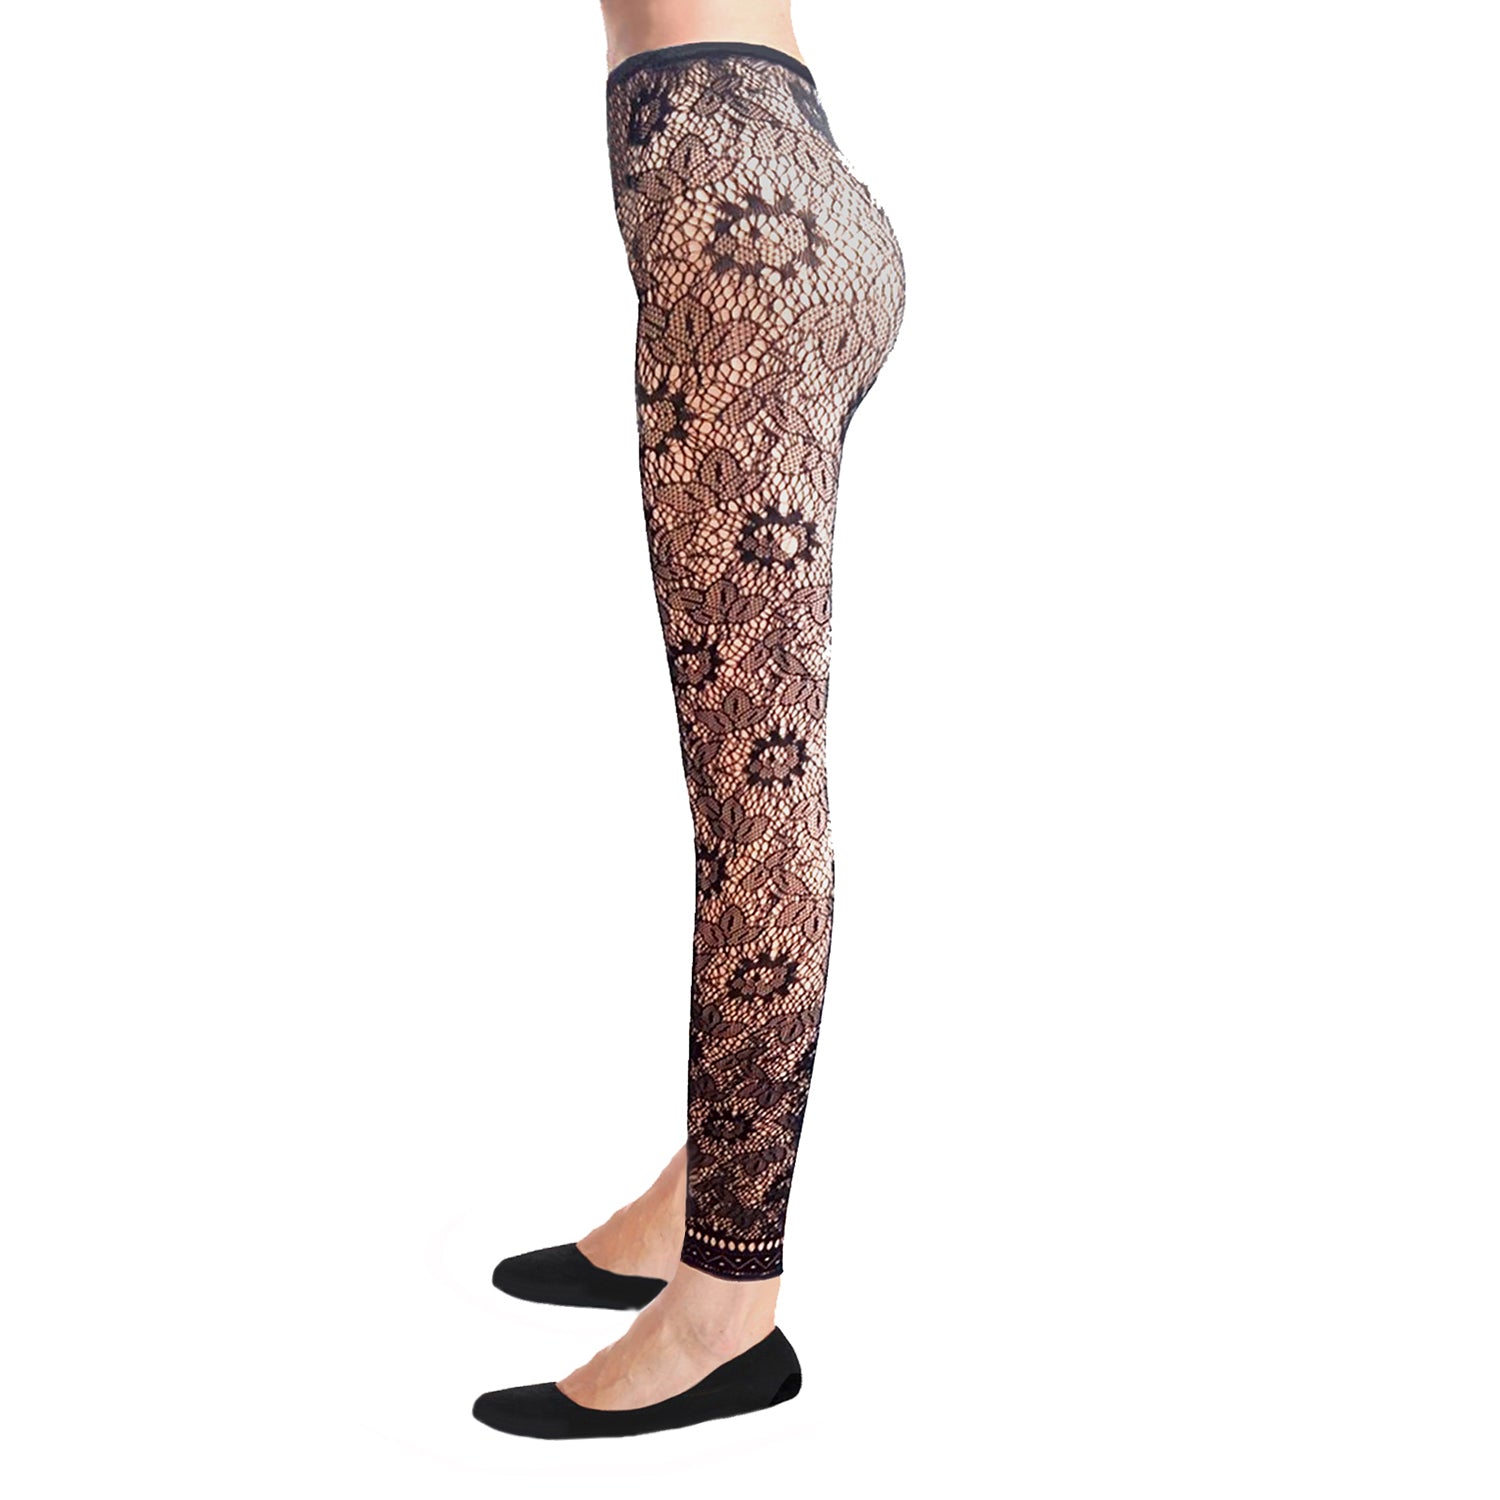 Simply Joshimo Star Patterned Black Footless Fishnet Tights